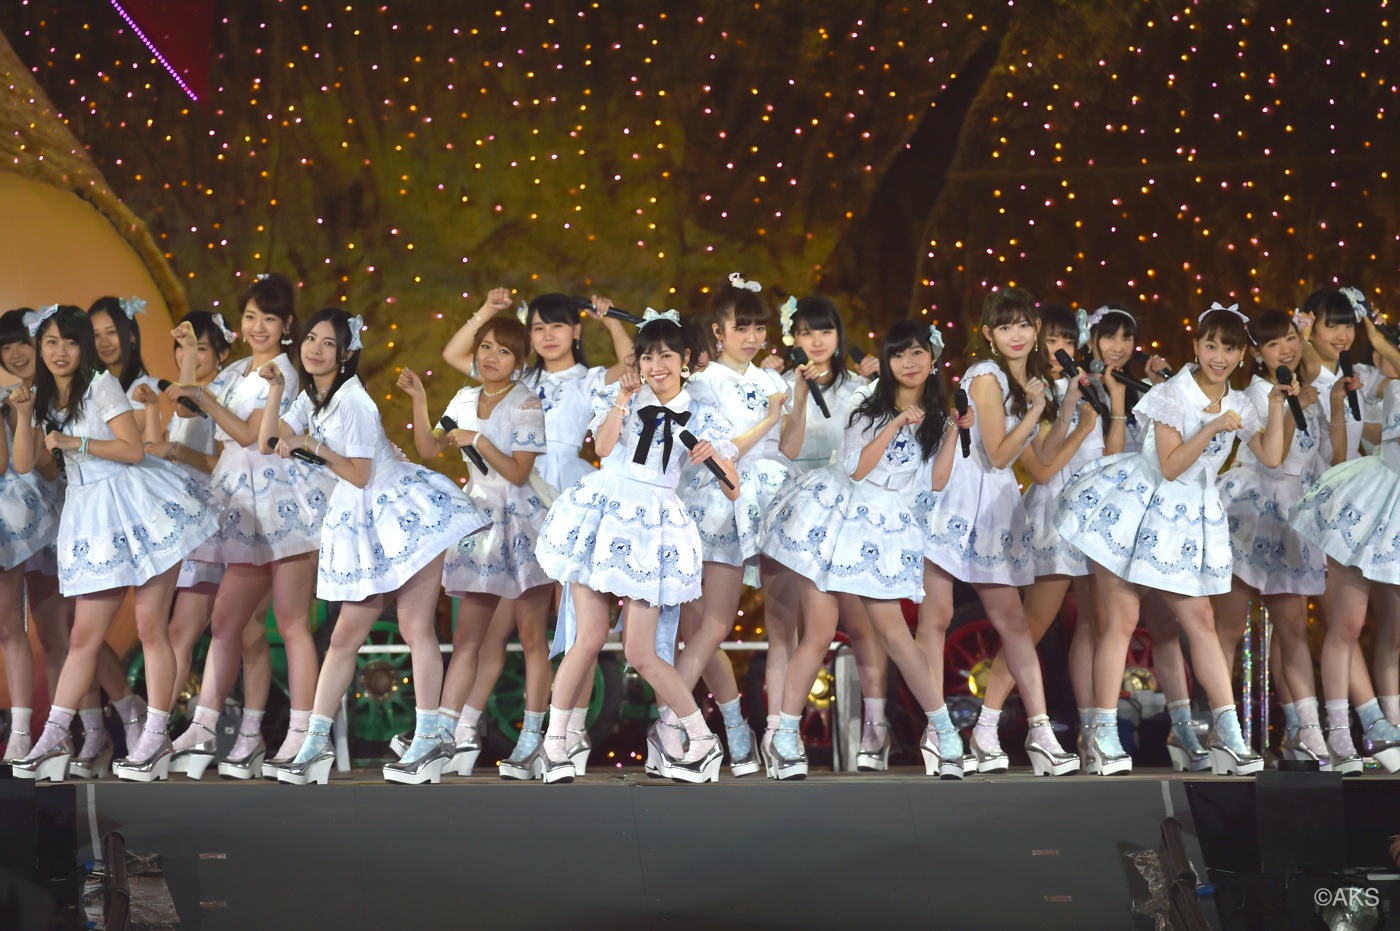 AKB48 Reveals Trailer for New DVD “AKB48 One-man Spring Concert in National Olympic Stadium”